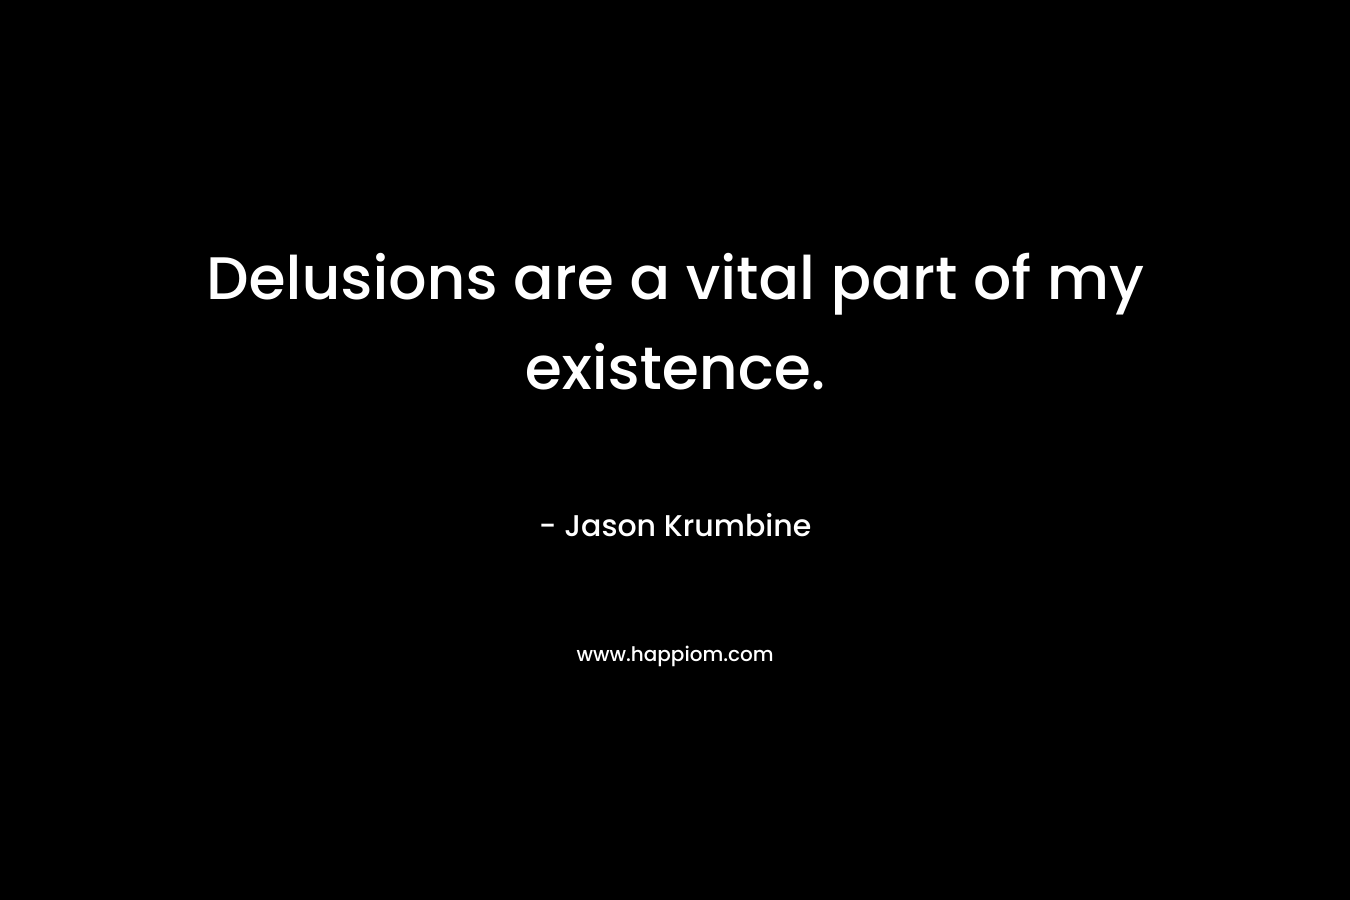 Delusions are a vital part of my existence. – Jason Krumbine